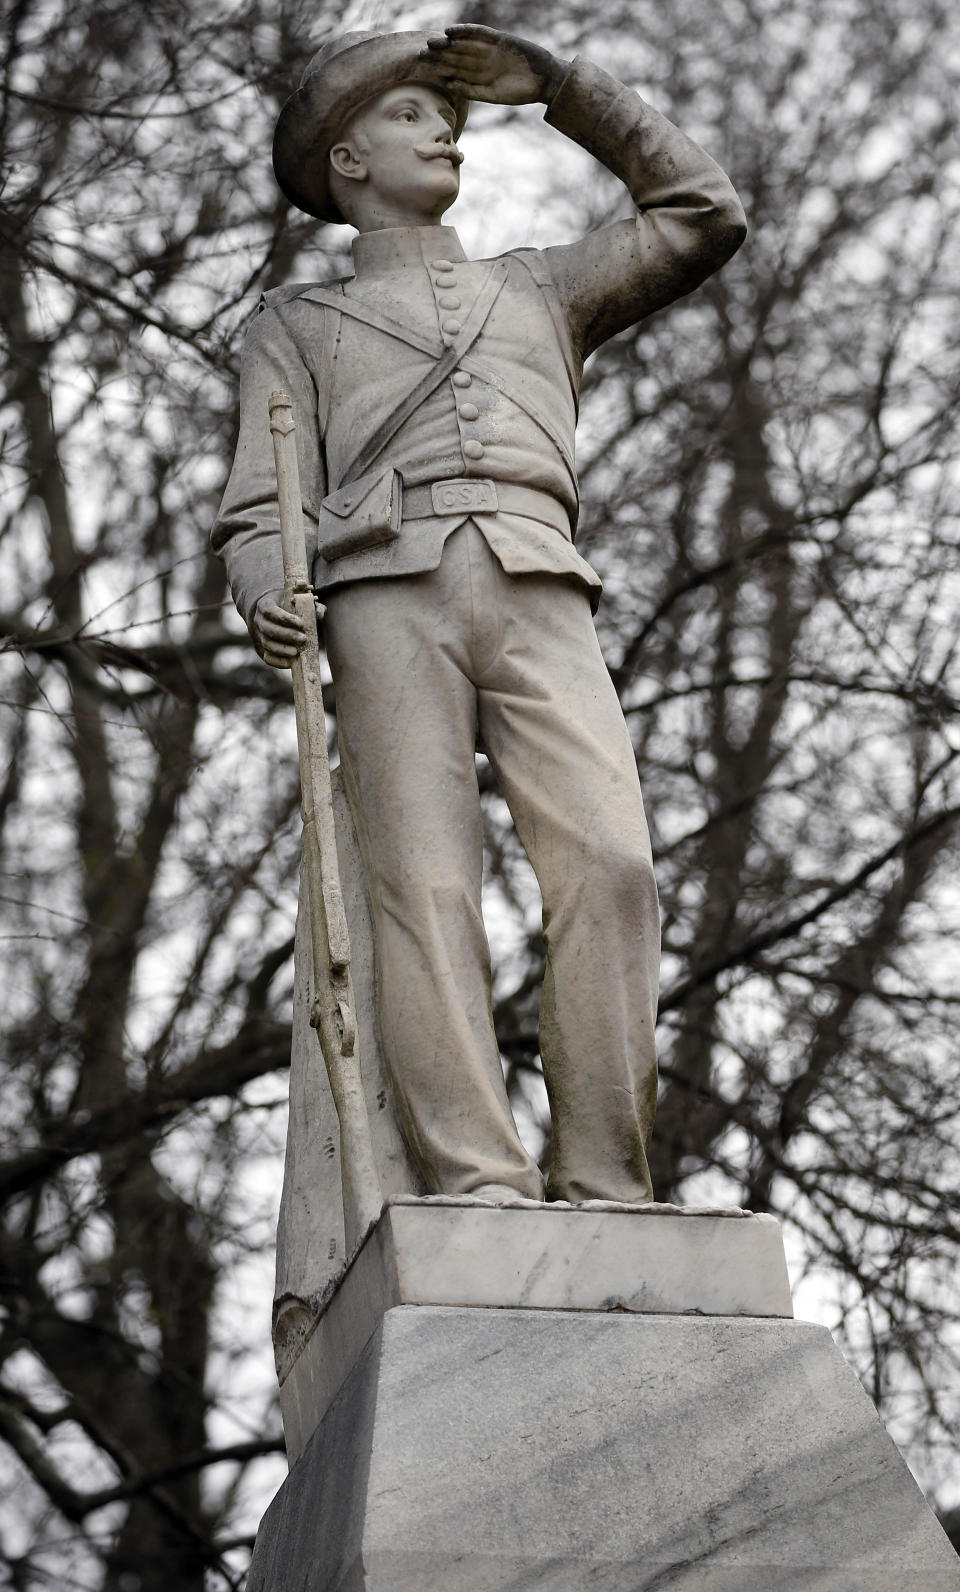 This Feb. 23, 2019 photog shows the Confederate soldier monument at the University of Mississippi in Oxford, Miss. The University of Mississippi's leader says he agrees that a Confederate monument should be shifted from its current spot on campus. Interim Chancellor Larry Sparks said in a Thursday, March 21, 2019, statement that he is consulting with historic preservation officials on relocating the statue. (AP Photo/Rogelio V. Solis)